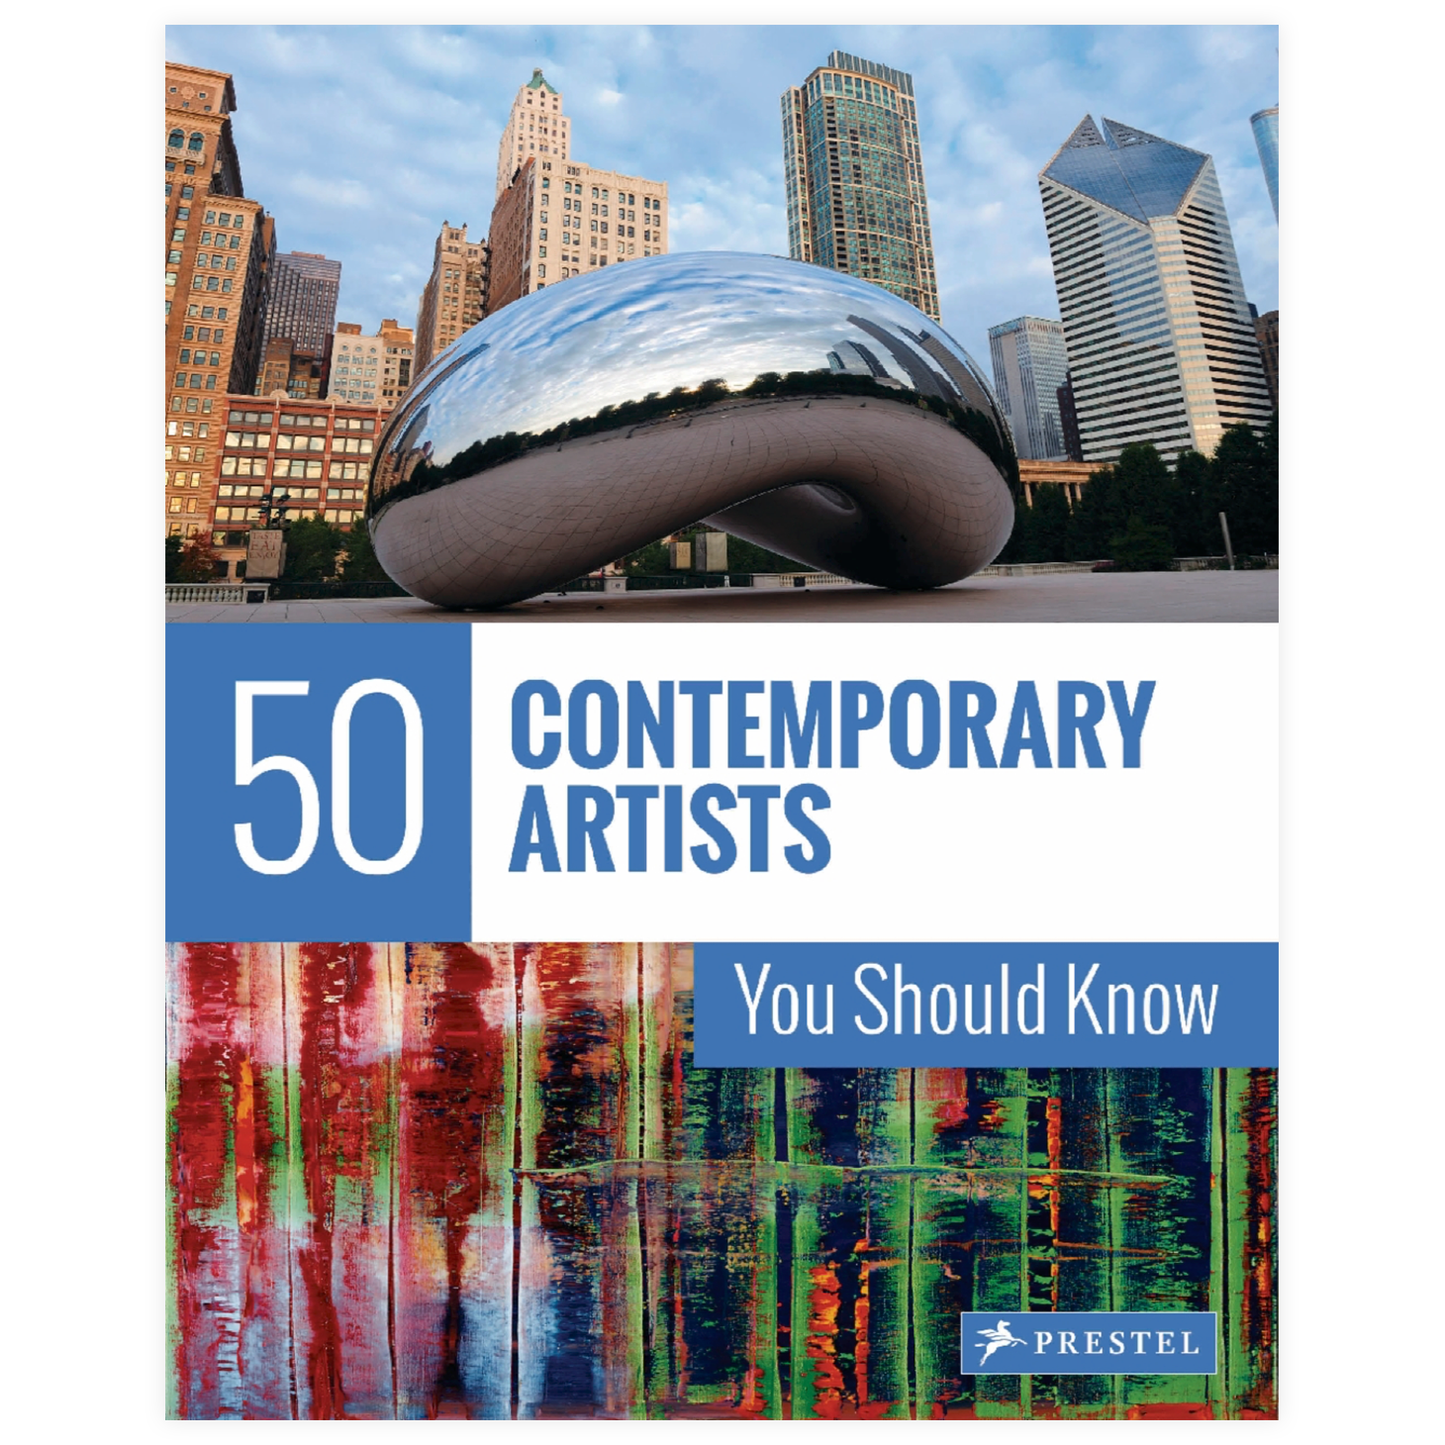 50 Contemporary Arists You Should Know